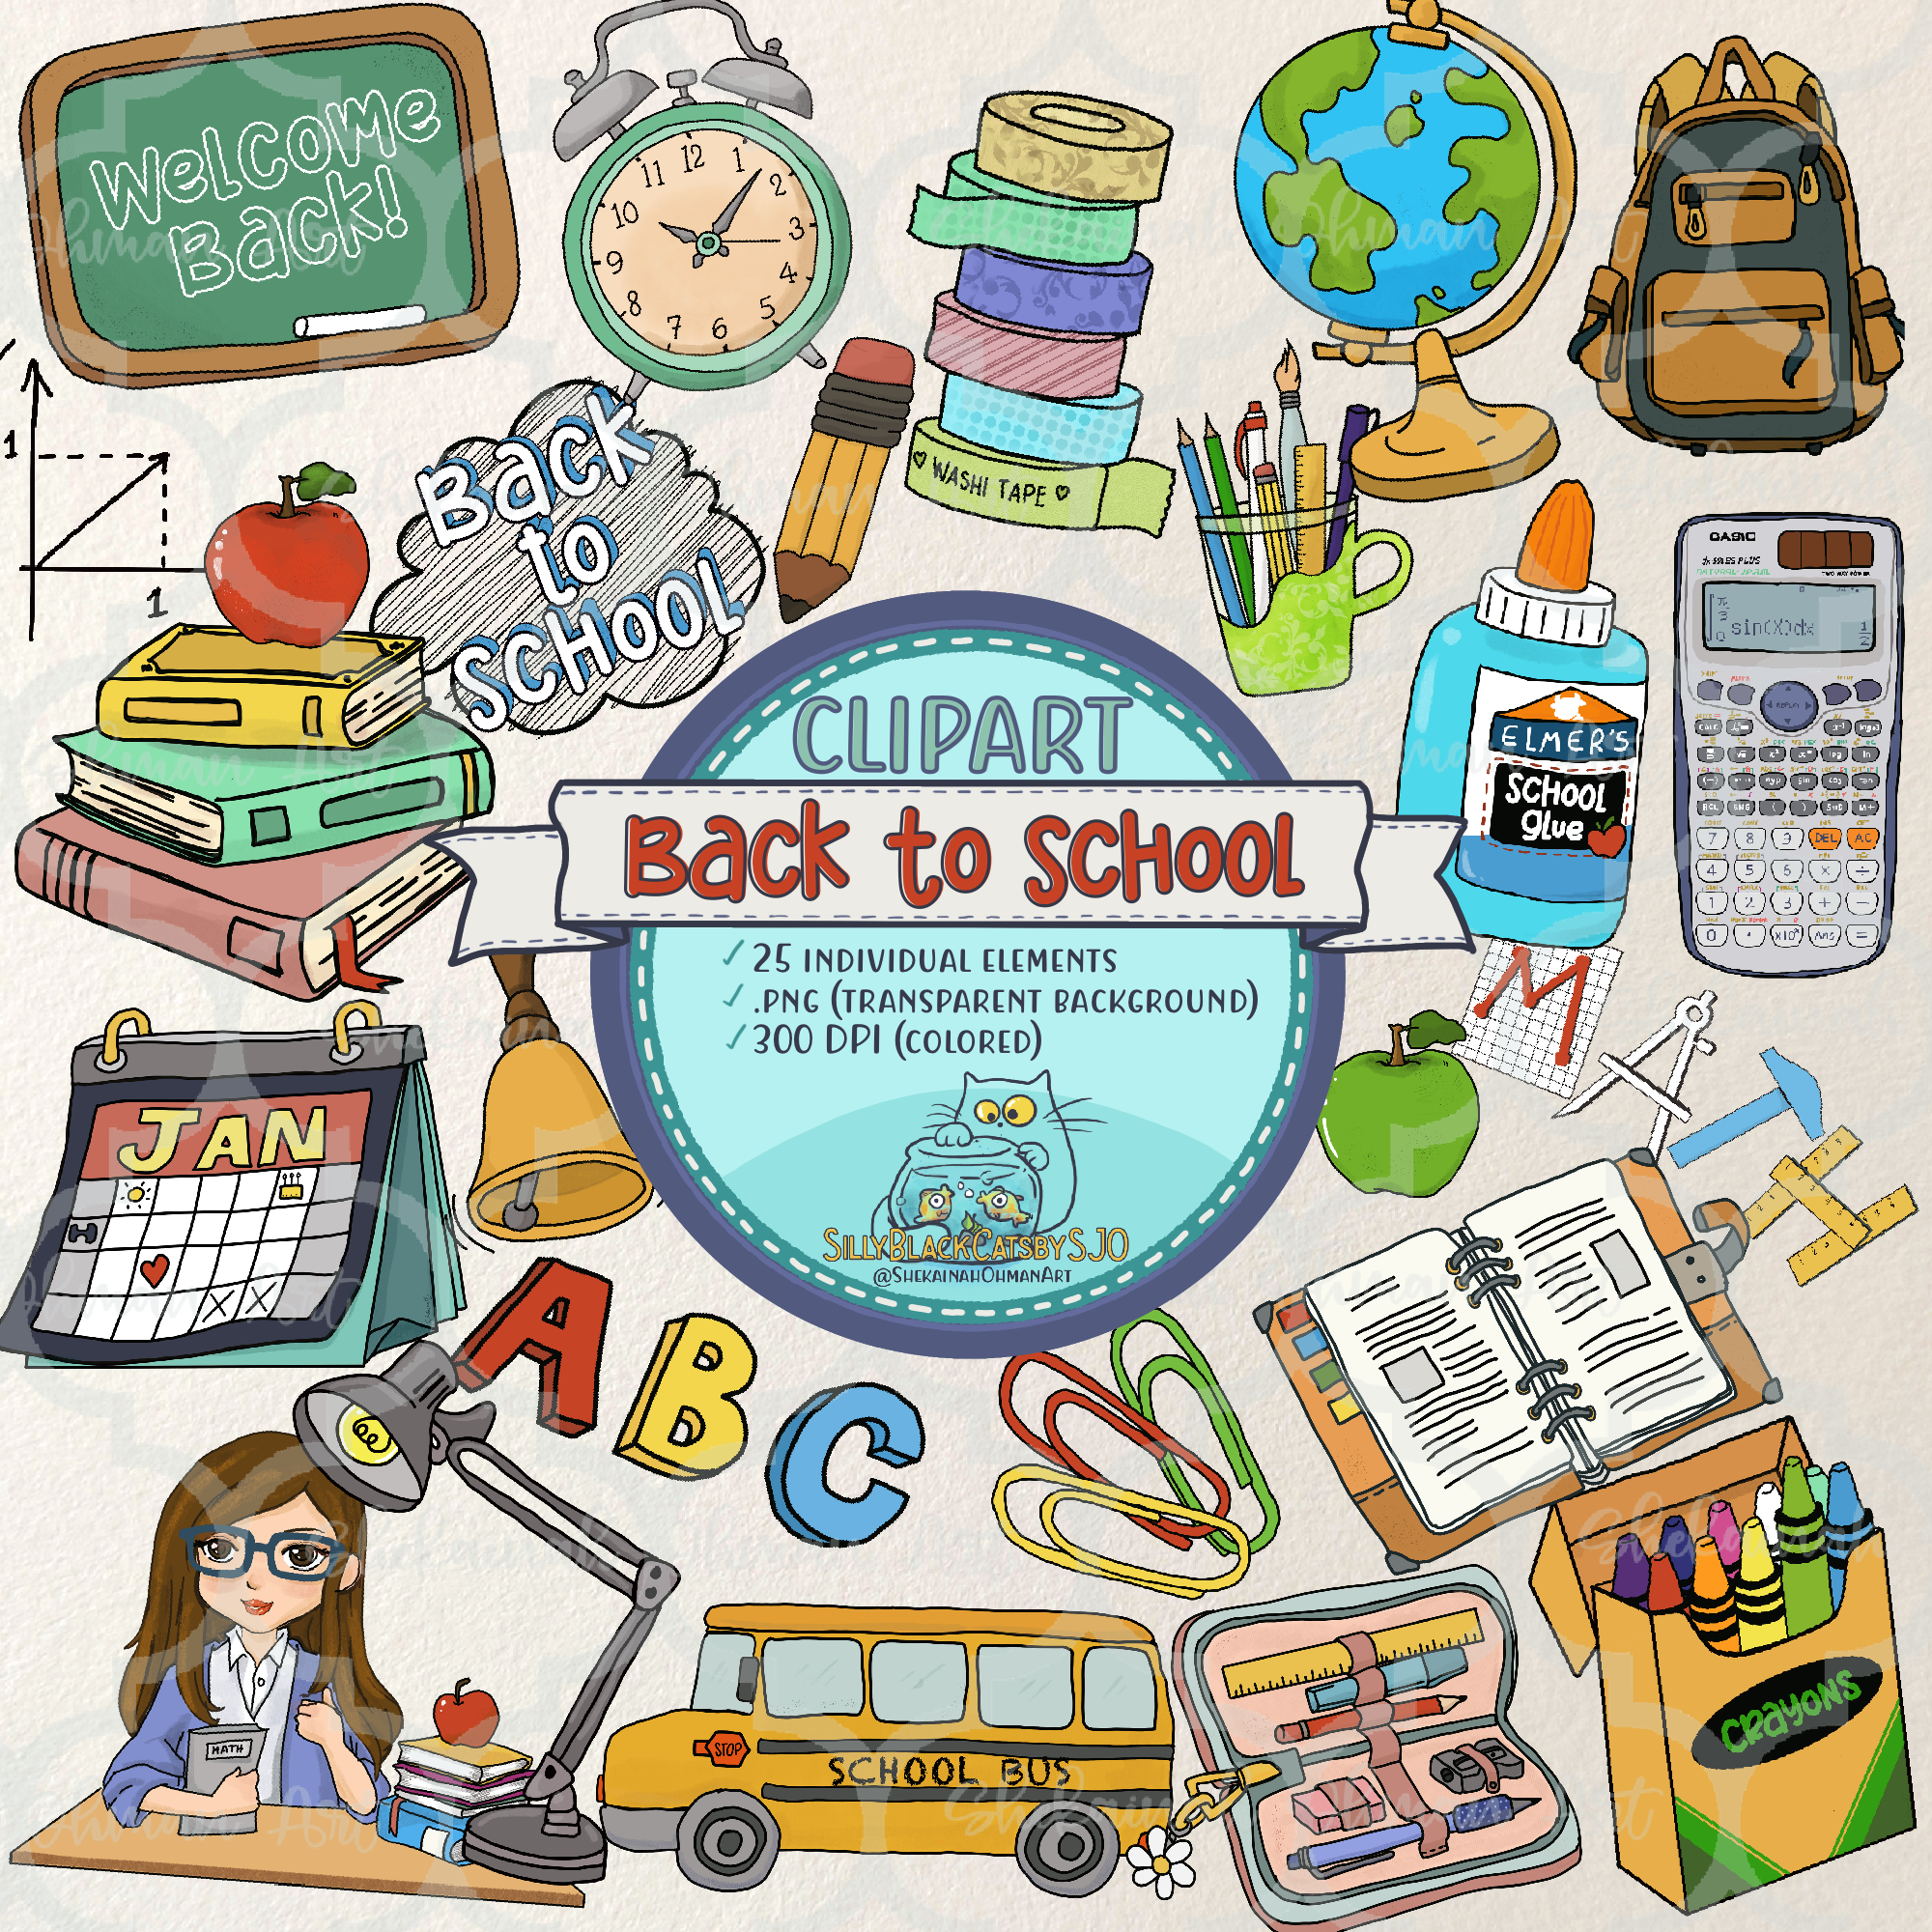 C-Back to school clipart bundle (COLORED) | School cliparts, stationary, png, bag, globe, calculator, clock, pen, books, bus